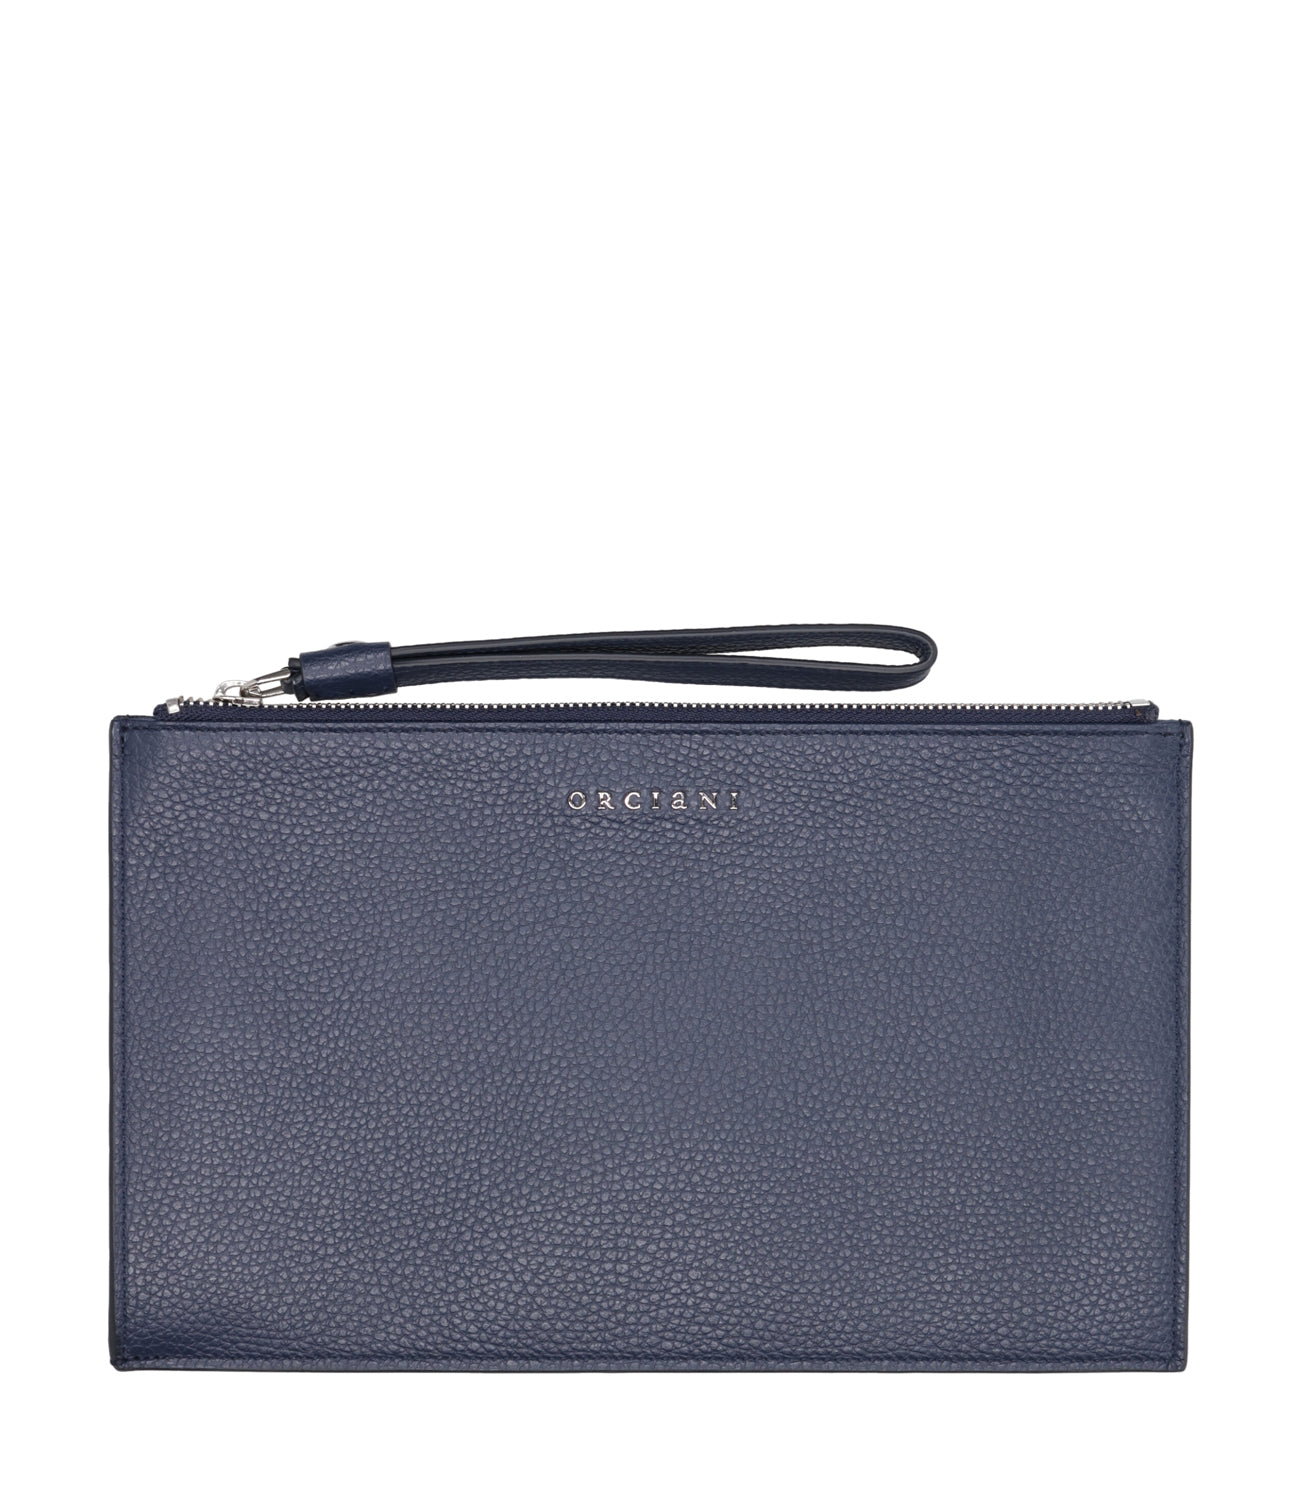 Orciani | Navy Blue Clutch Bag